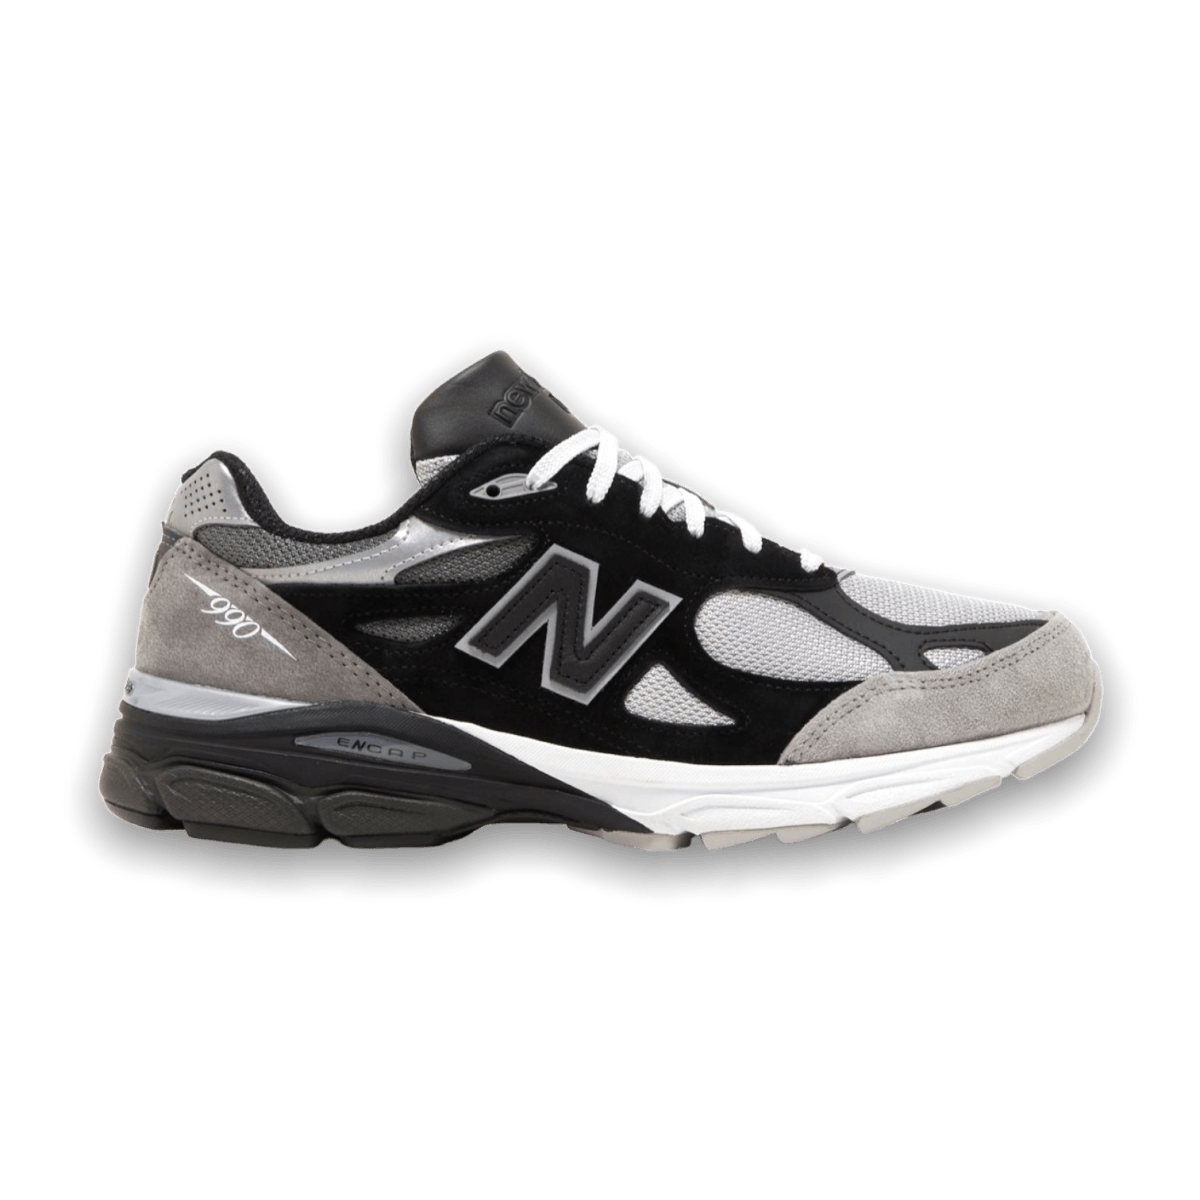 New Balance DTLR x 990v3 Made in USA 'GR3YSCALE' - Grade School - Low Sneaker - New Balance - Jawns on Fire